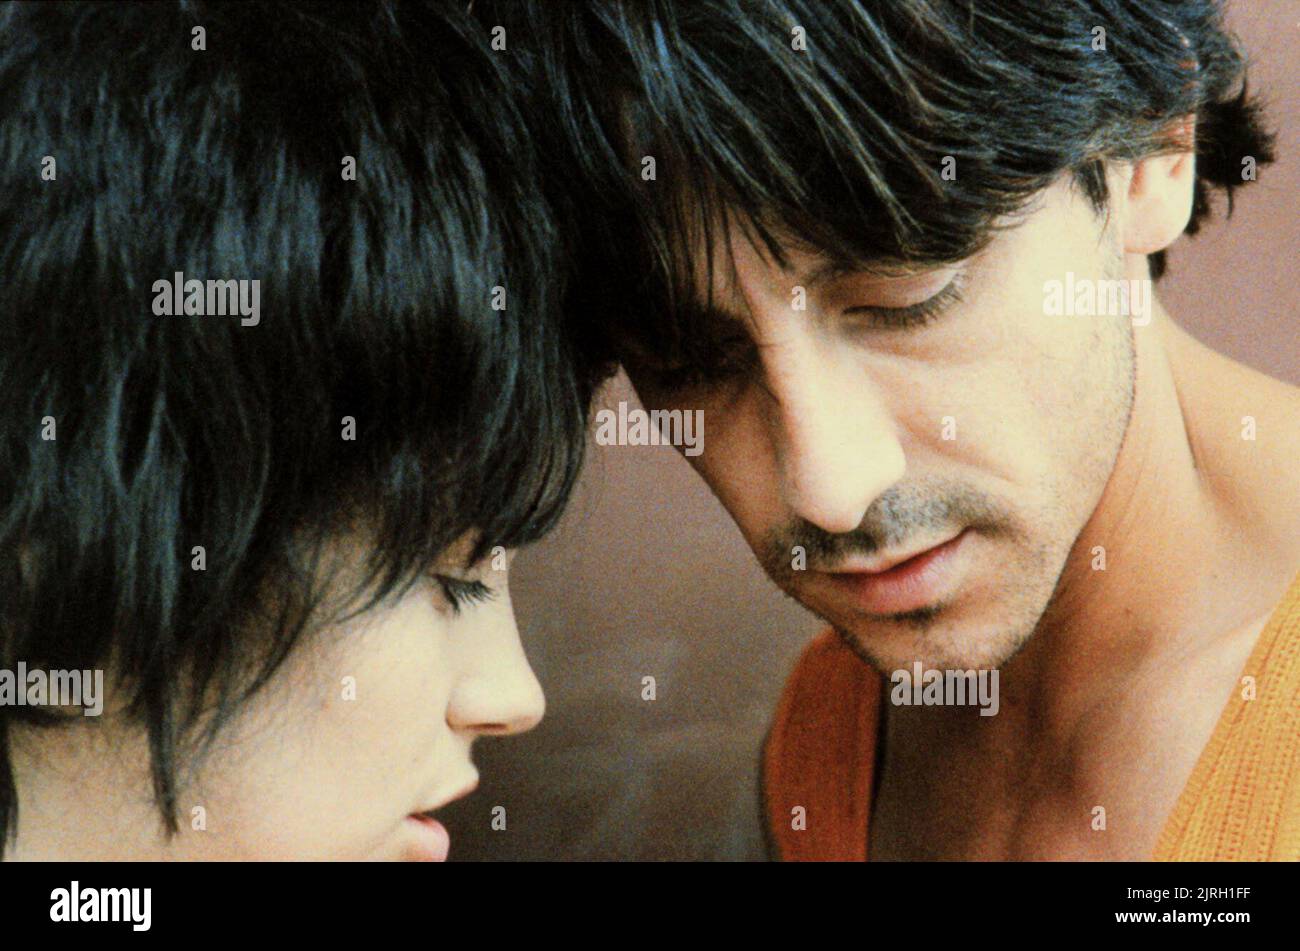 BEATRICE DALLE, JEAN-HUGUES ANGLADE, BETTY BLUE, 1986 Stock Photo